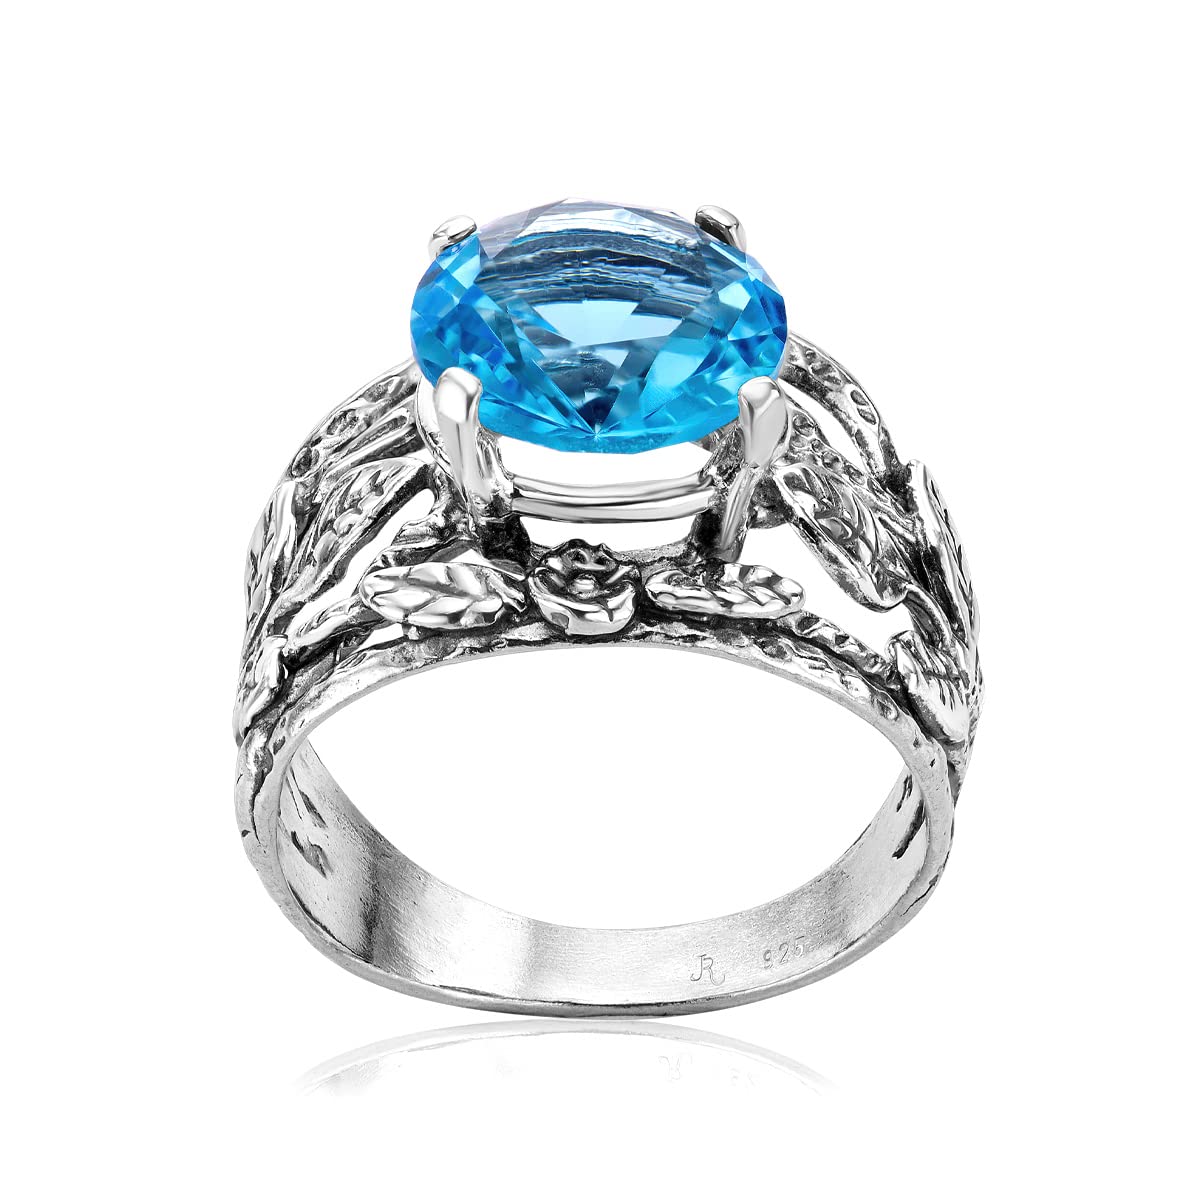 925 Sterling Silver Ring With Round Blue Crystal, Flower Nature, Oxidized, Vintage Look Stylish Hypoallergenic, Nickel and Lead-free, Artisan Handcrafted Designer Collection Made in Israel (Size 5-11)